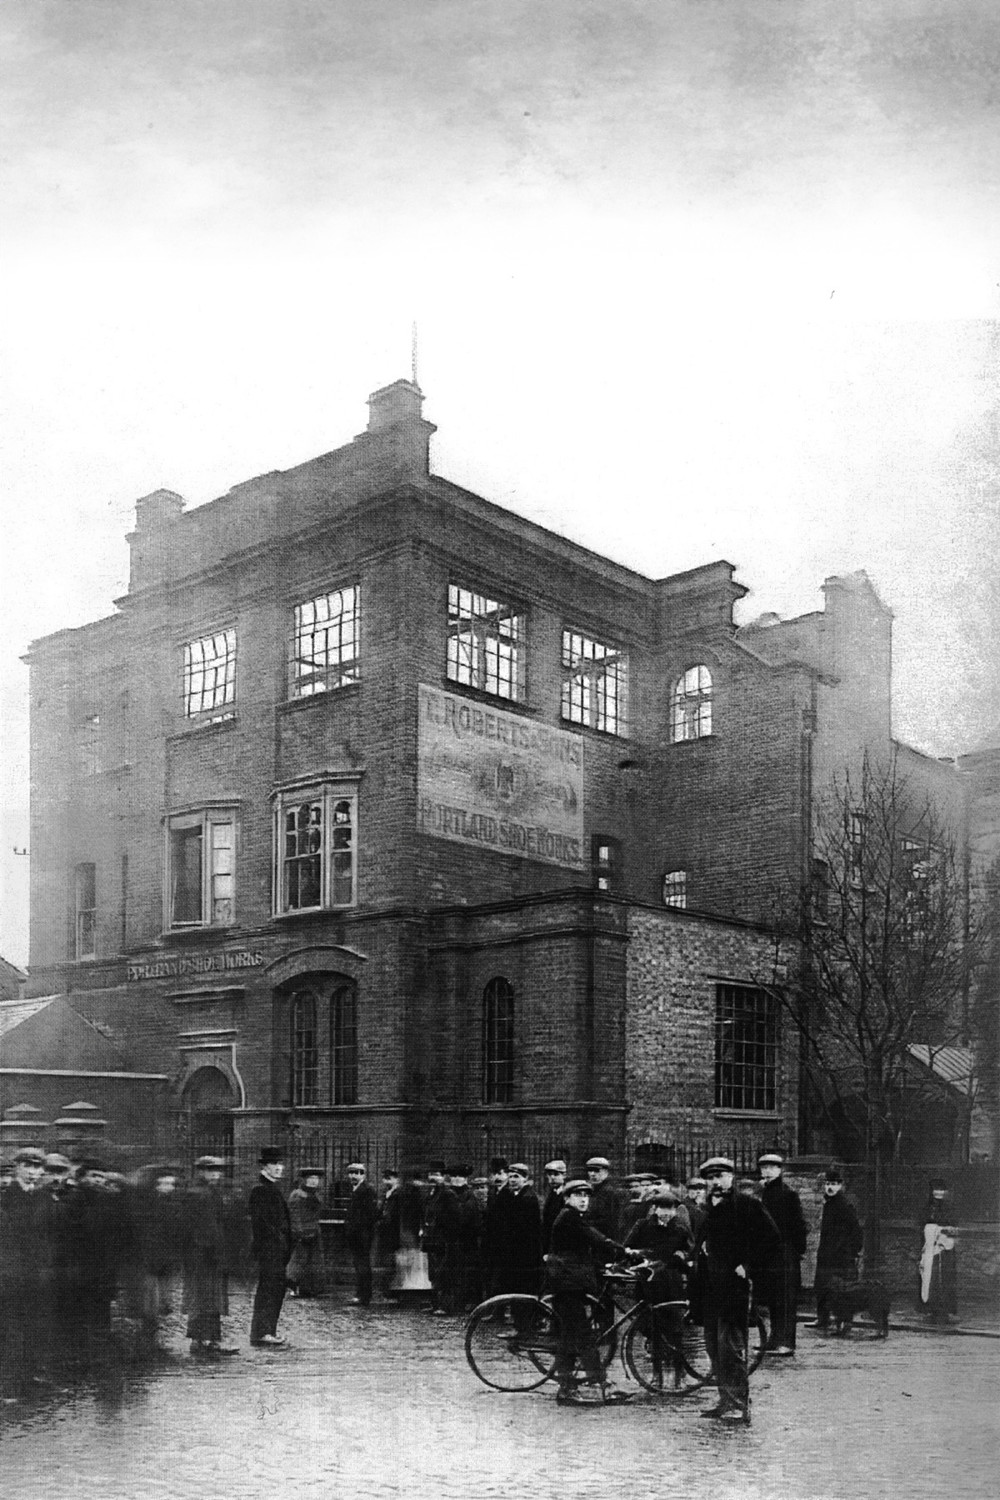 The original building as designed by Thomas Roberts, before 1909. Image courtesy of the Record Office of Leicester Leicestershire and Rutland